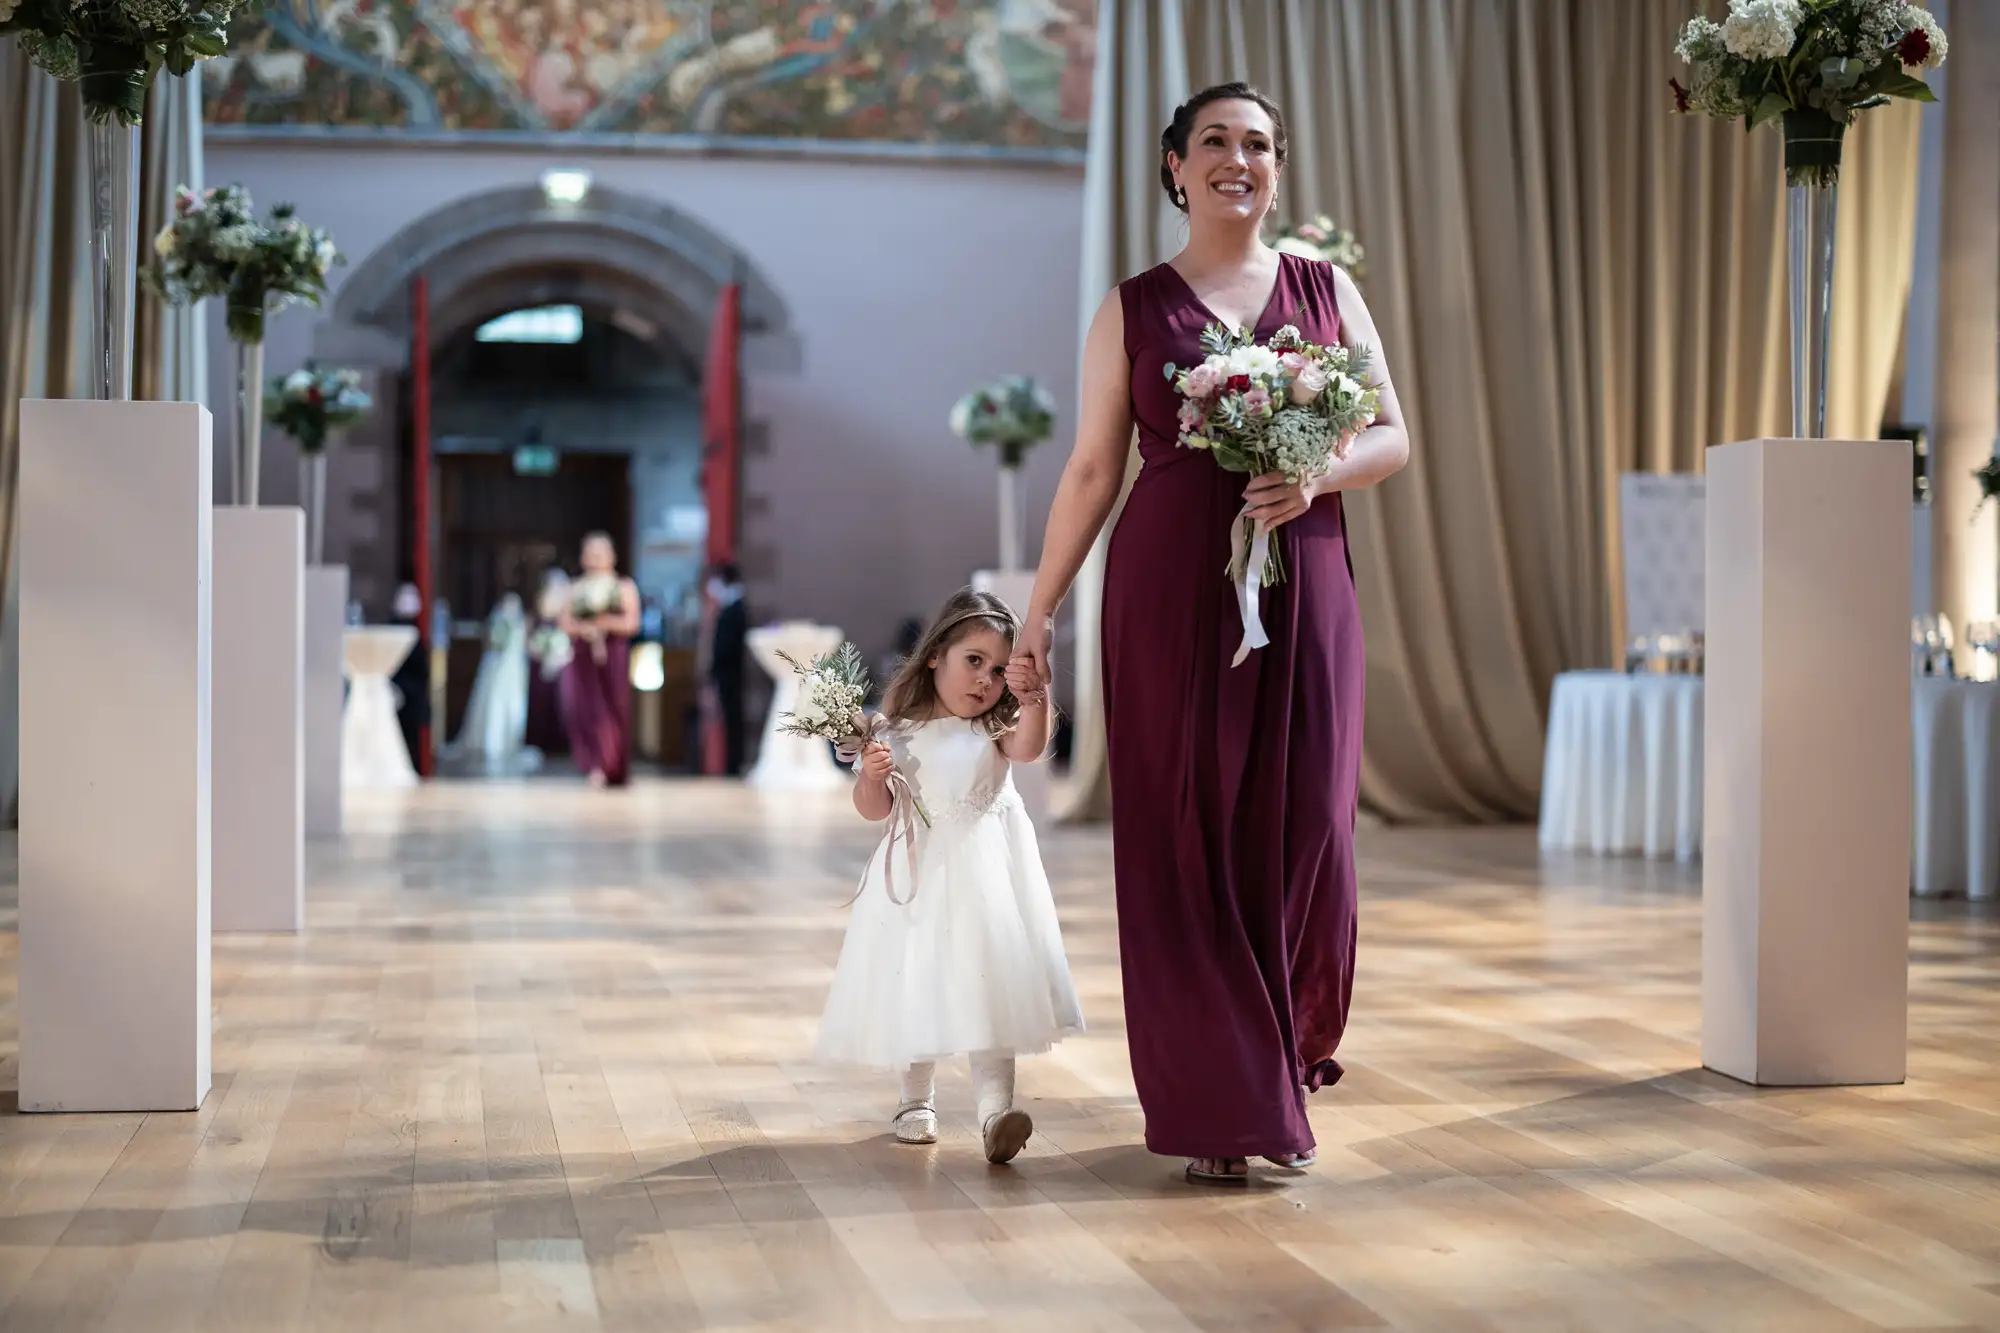 A woman in a long purple dress smiles as she walks down an aisle with a young girl in a white dress, both holding bouquets, in a decorated hall.